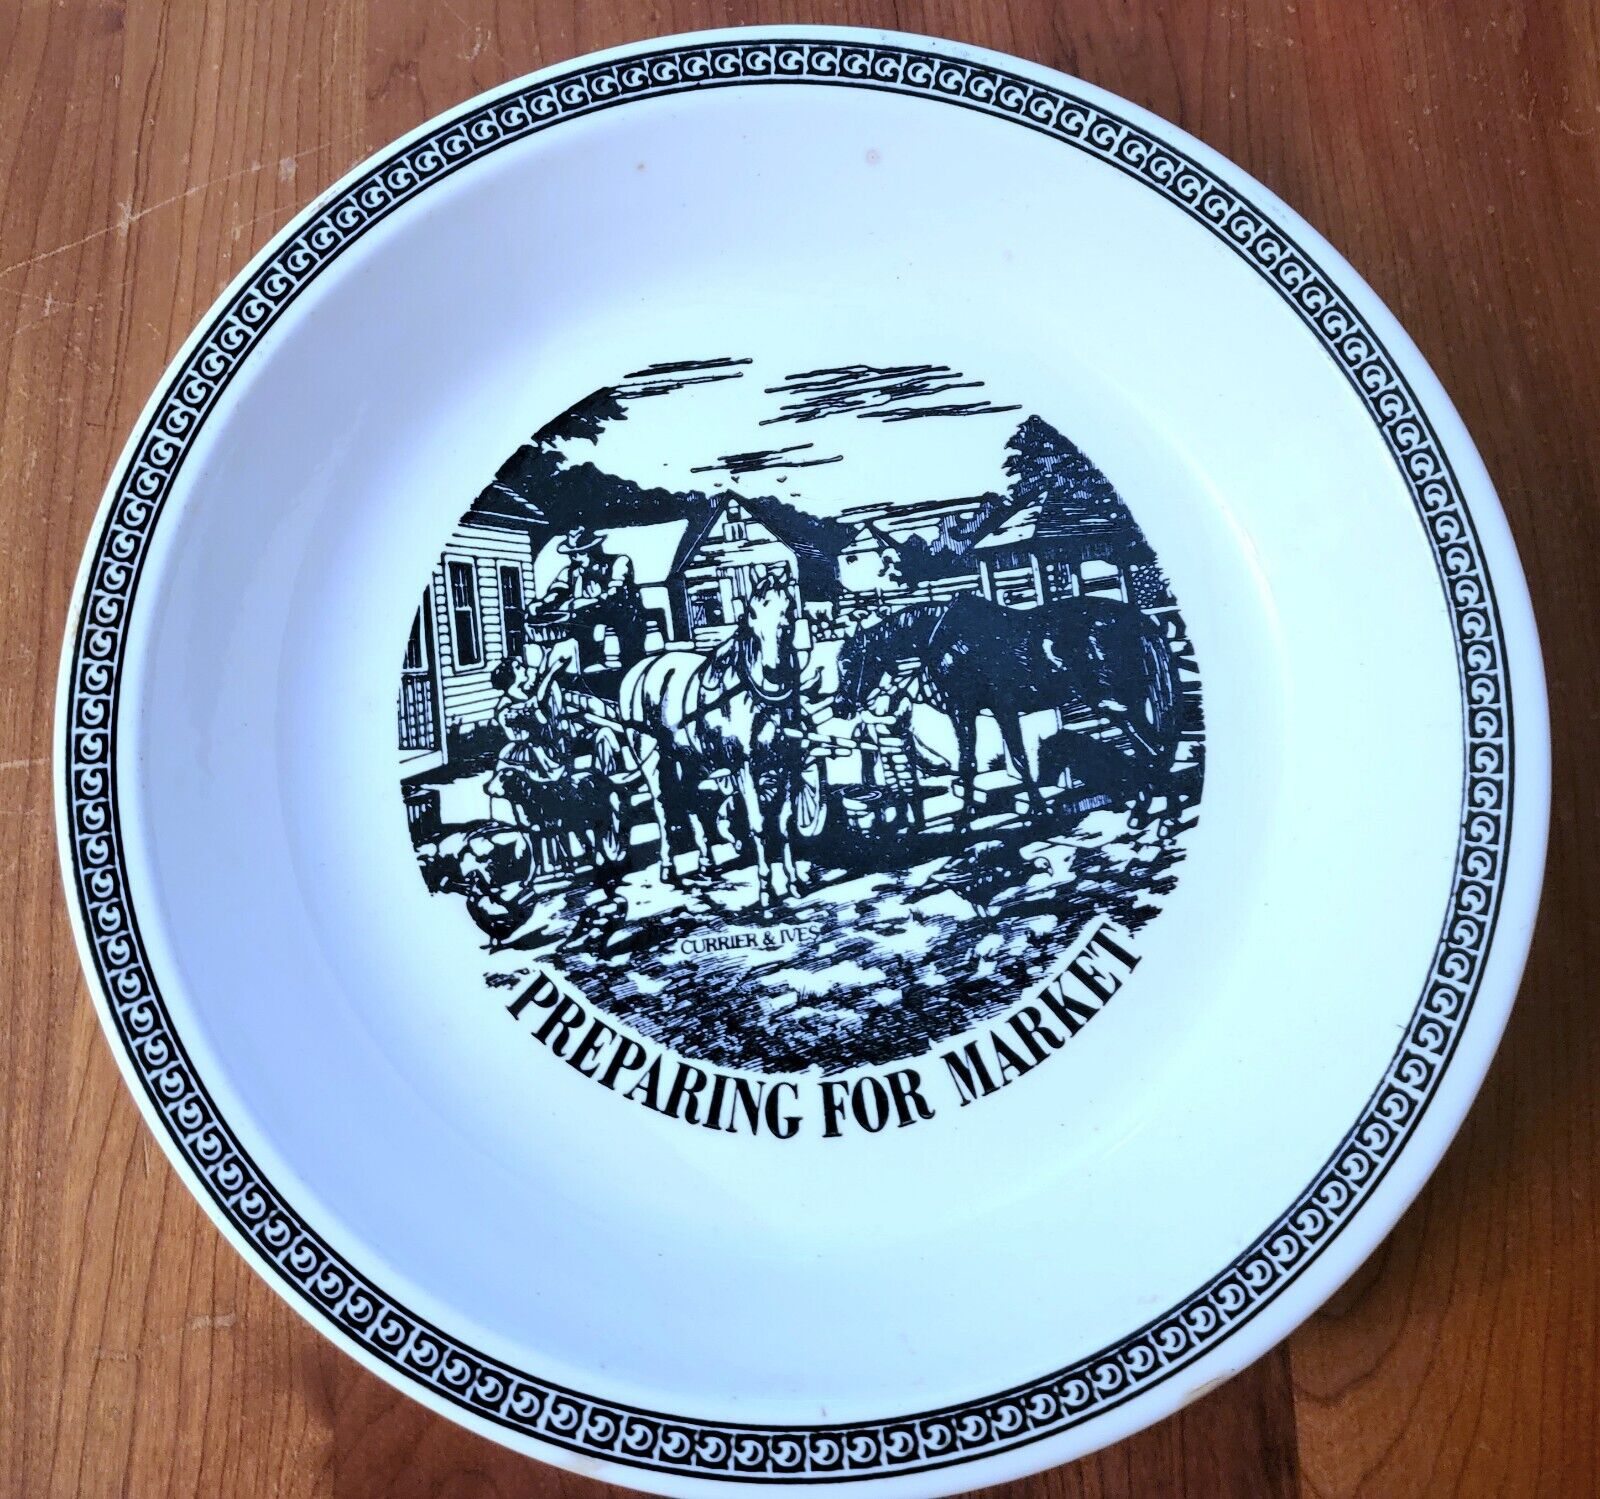 SCARCE PREPARING FOR MARKET Vintage 1970s Reproduction Currier & Ives Pie Plate